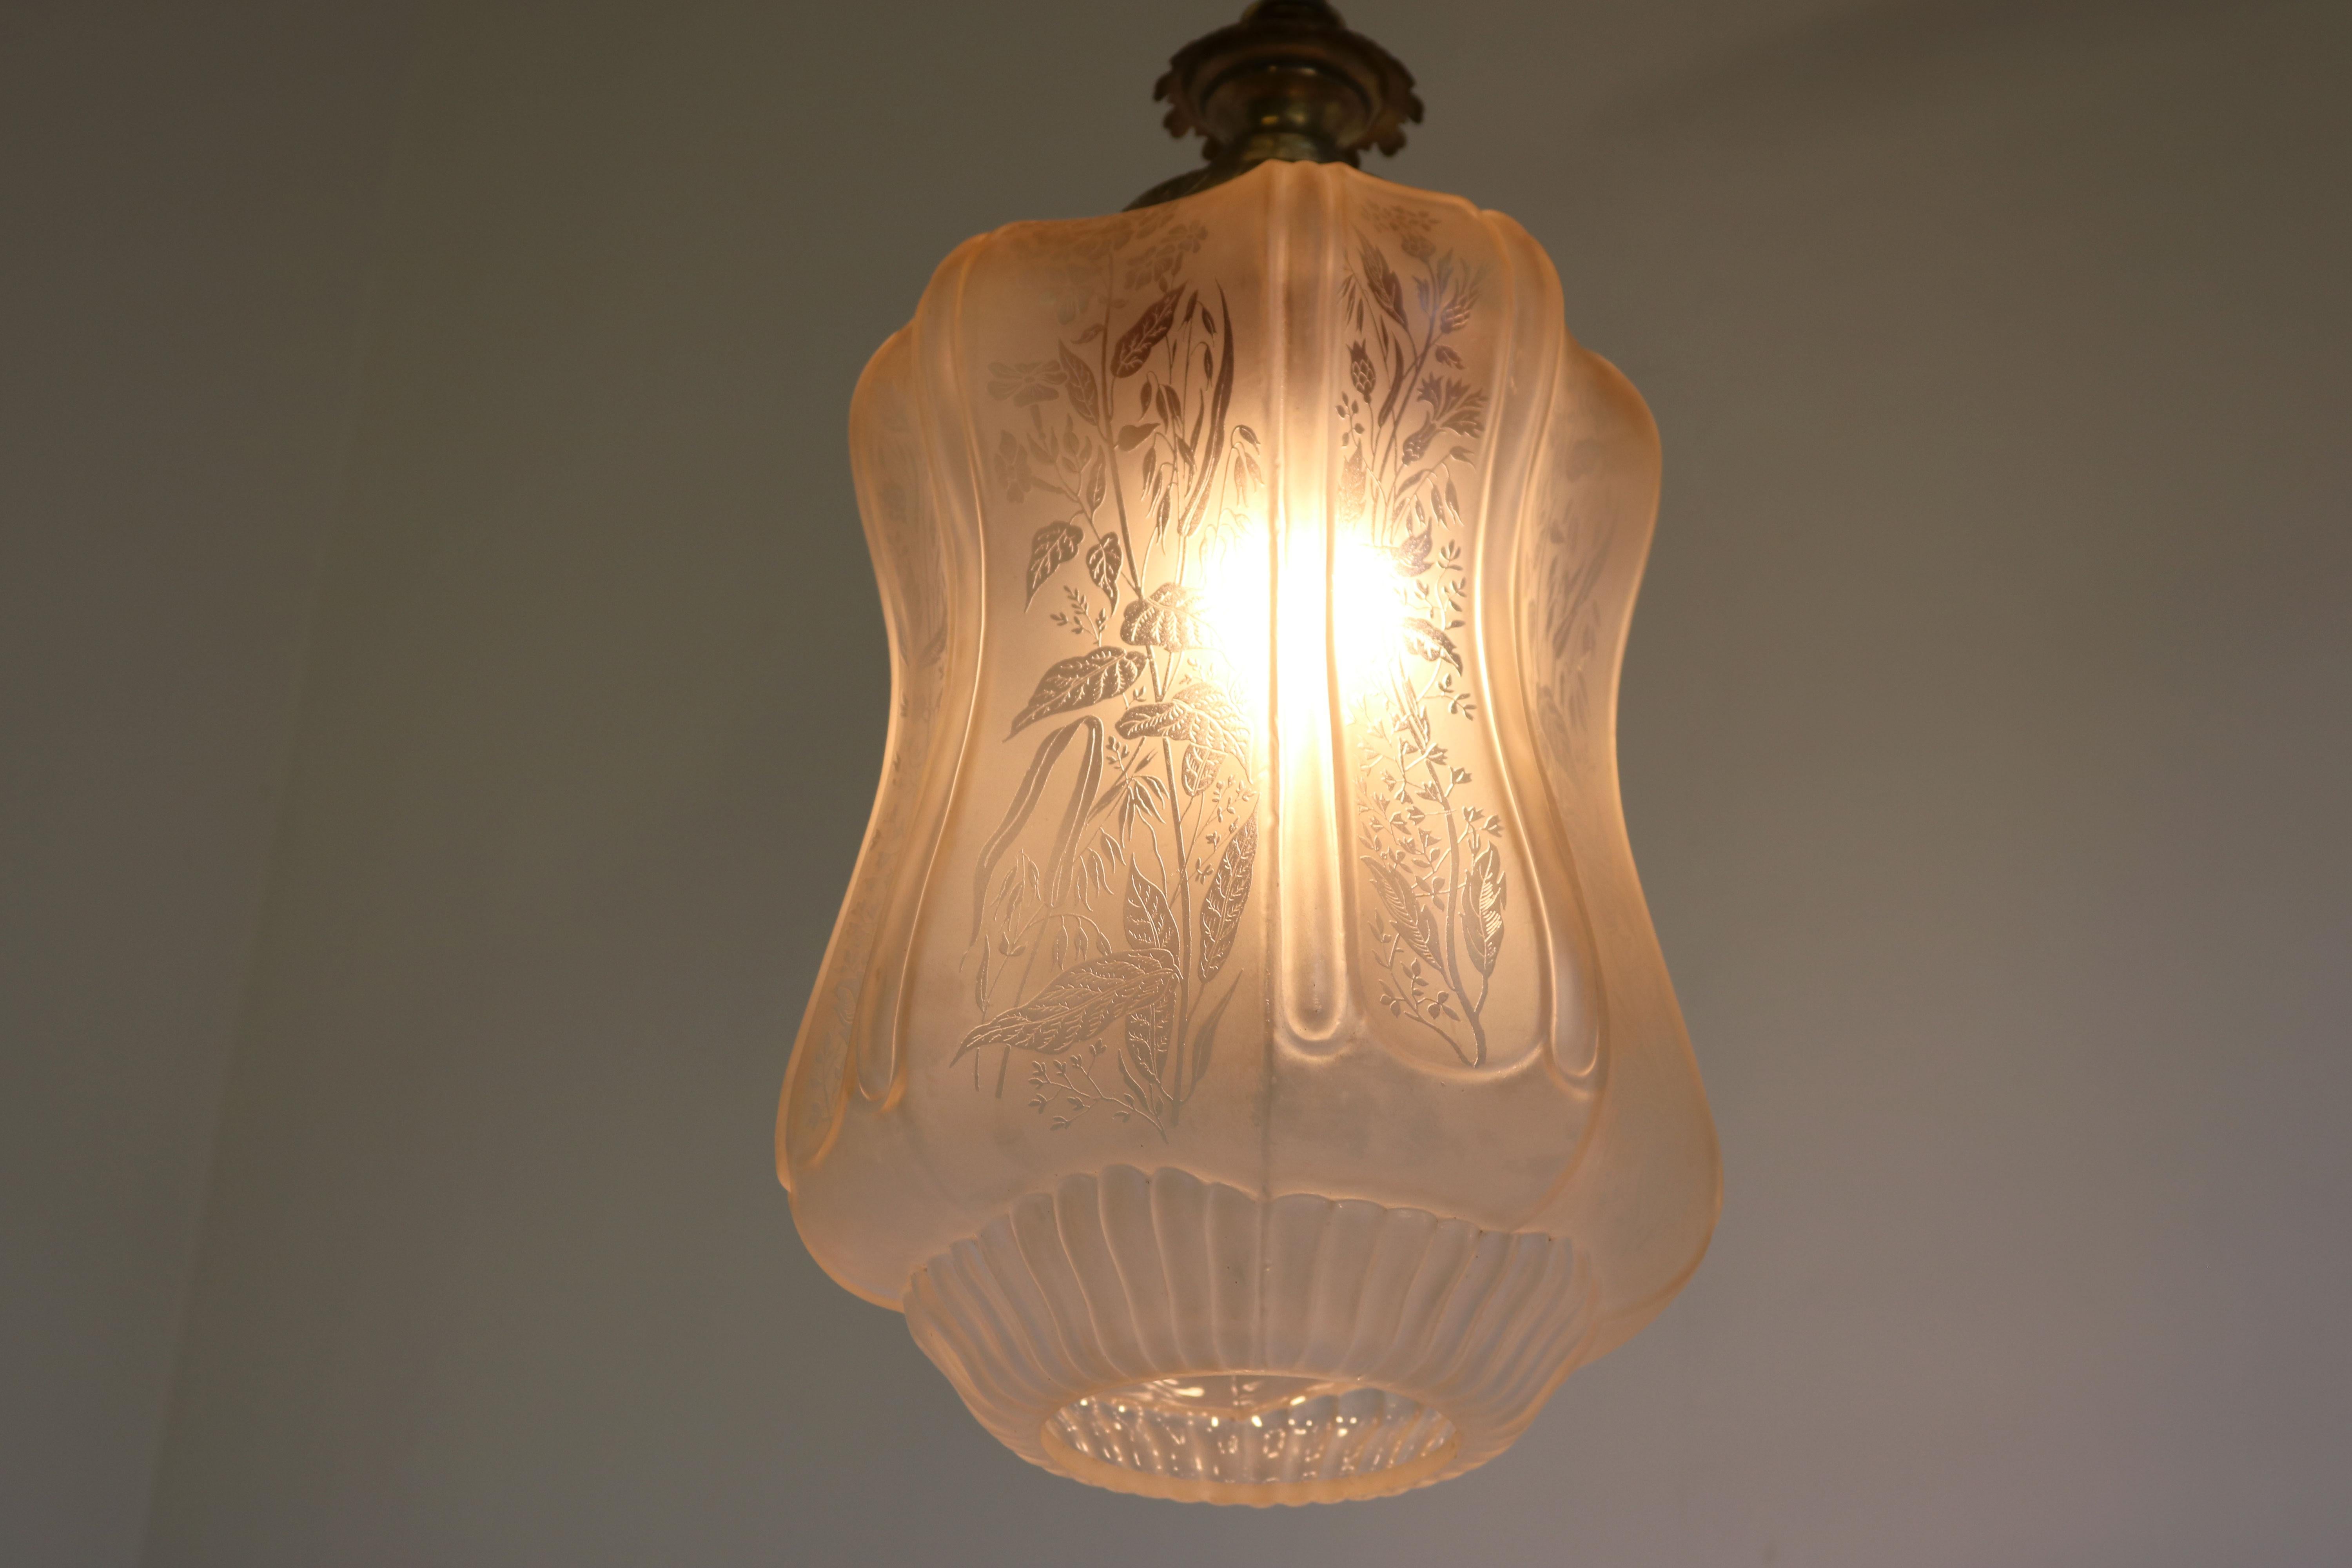 Hand-Crafted Large Antique French Art Nouveau Pedant Light 1910 Floral Glass Light Chandelier For Sale